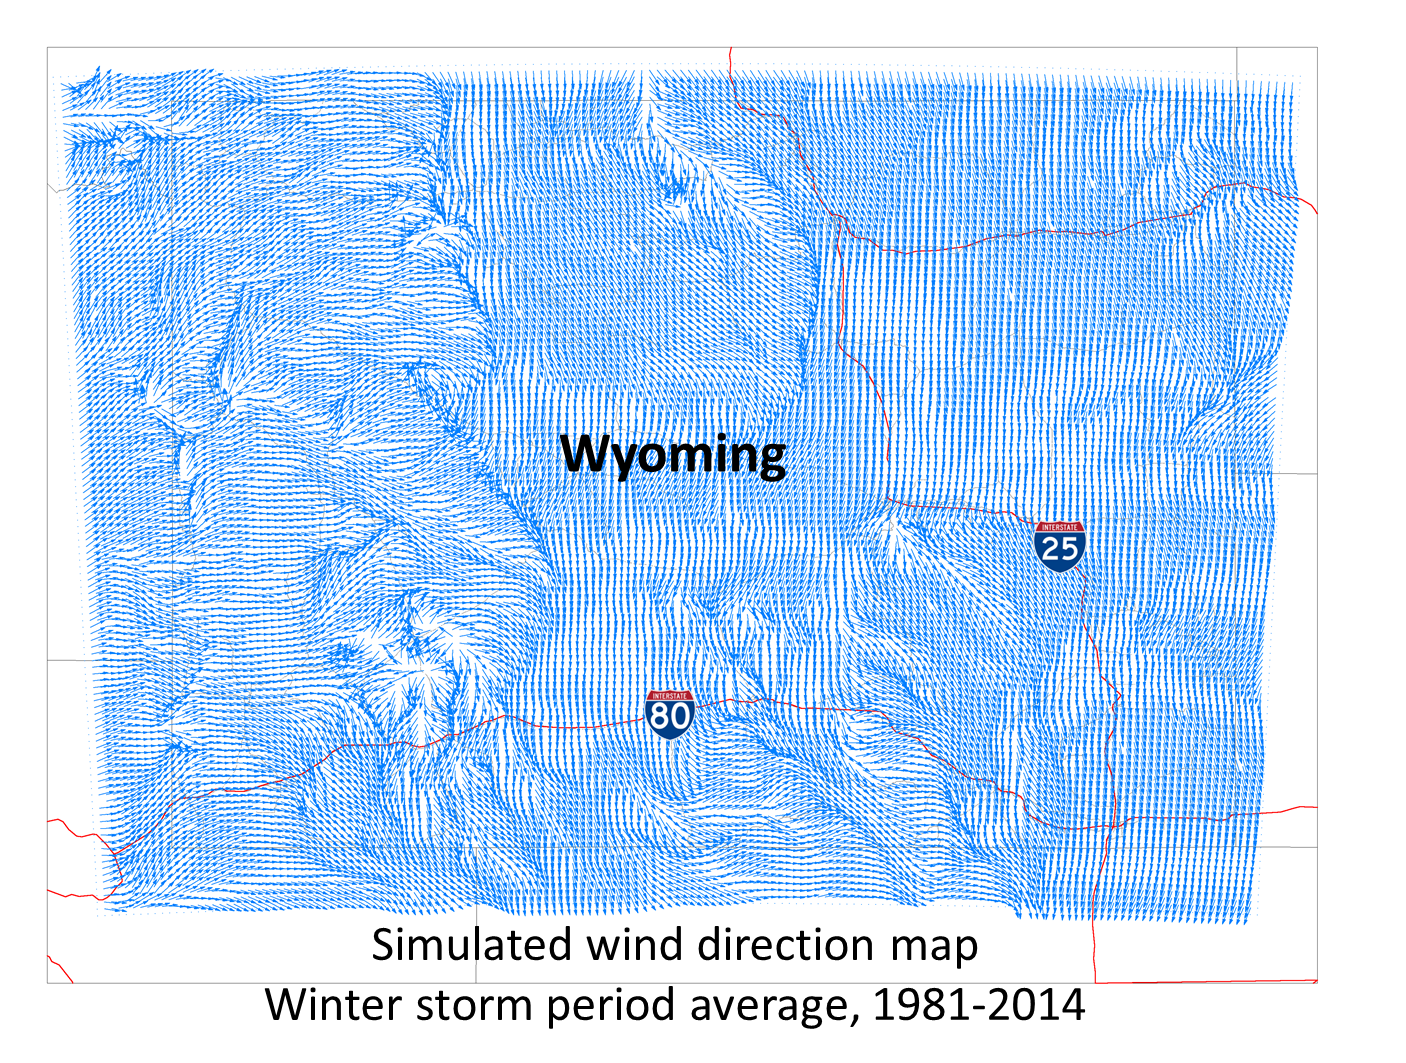 Simulated direction of wind map of Wyoming